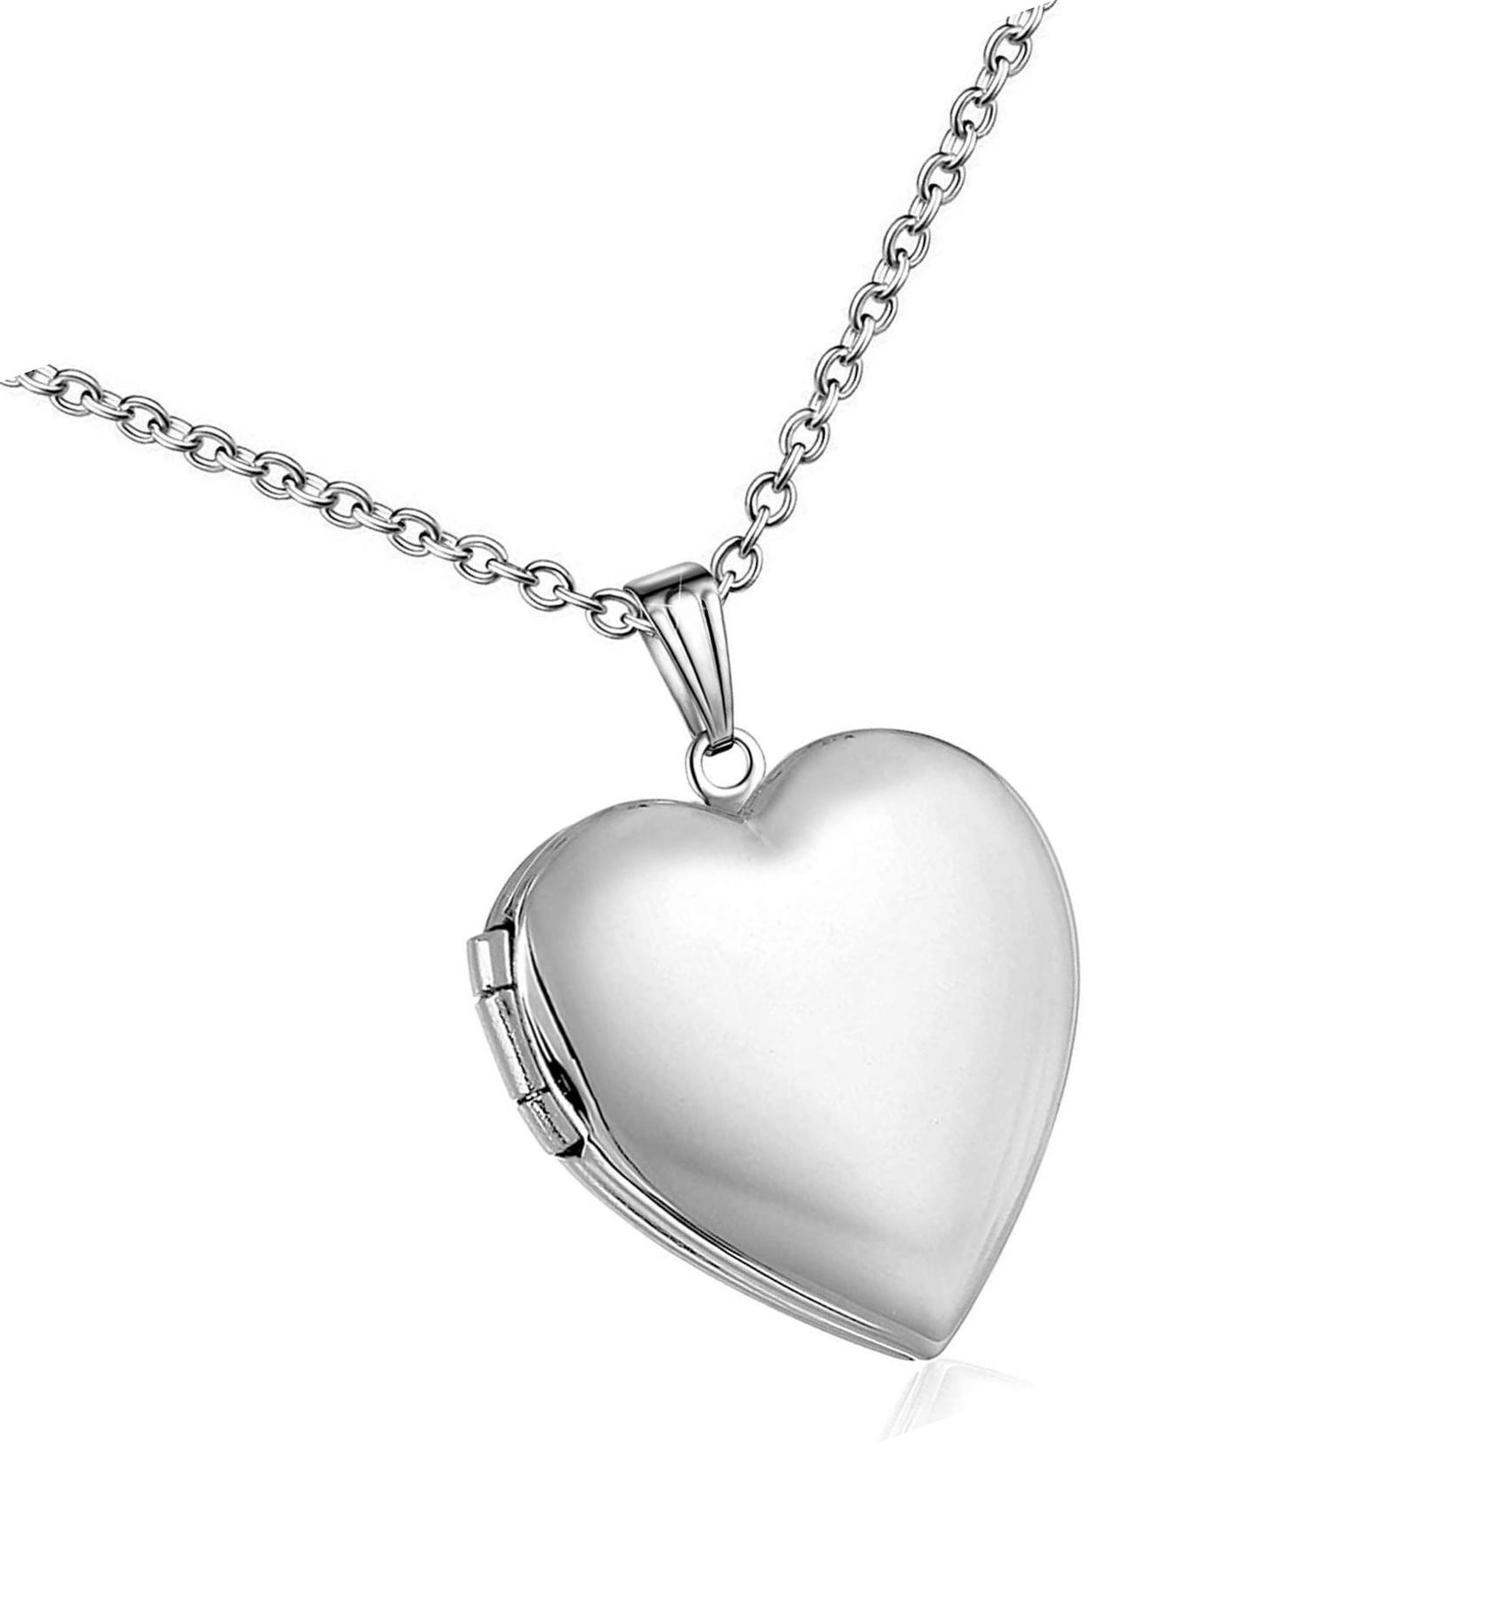 Primary image for Love Heart Locket Necklace that Holds Pictures Gifts